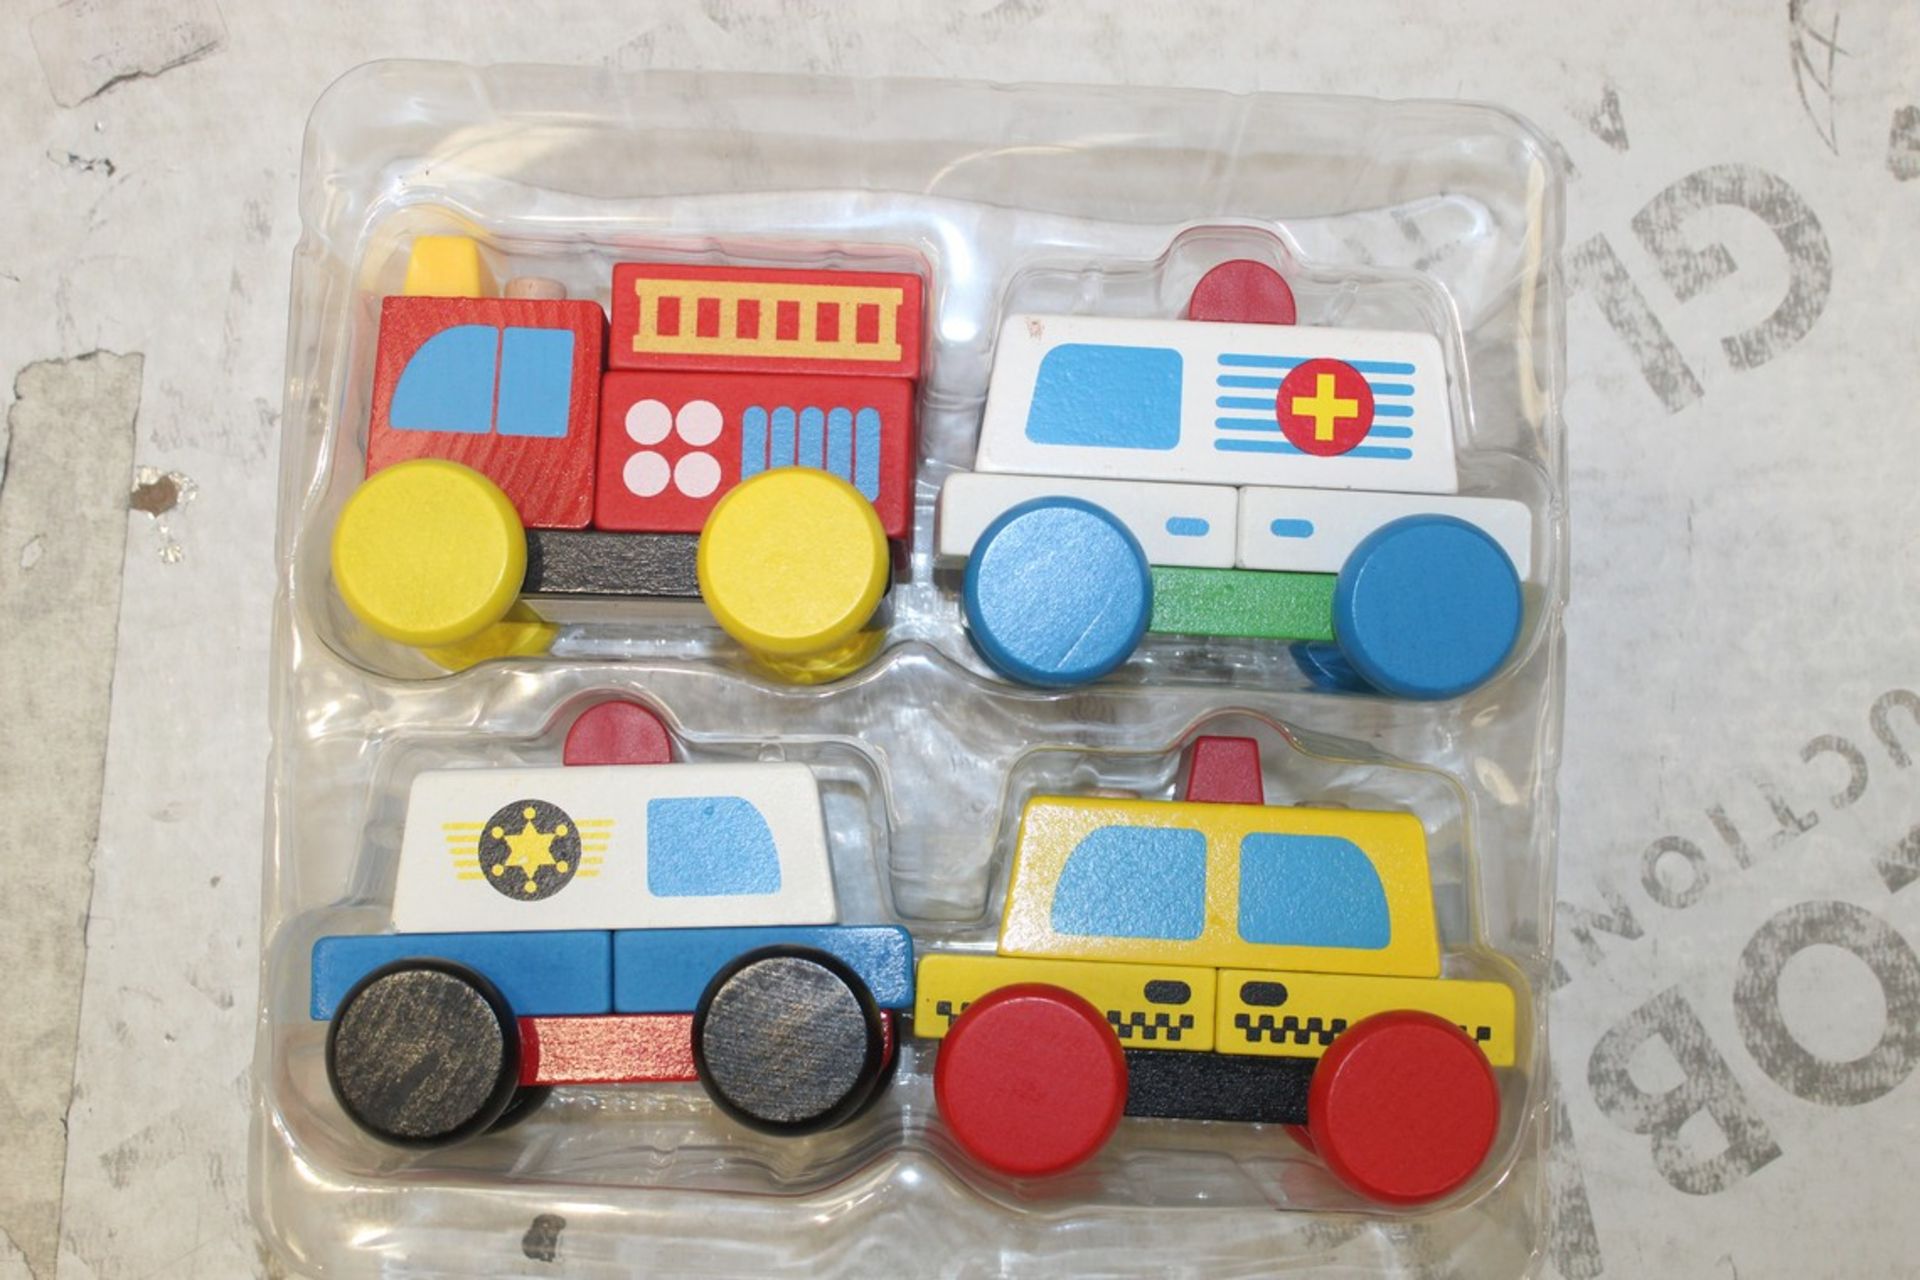 Lot to Contain 6 Boxed Brand New Sets of 4 My First Emergency Vehicles Wooden Push Along Toy Cars